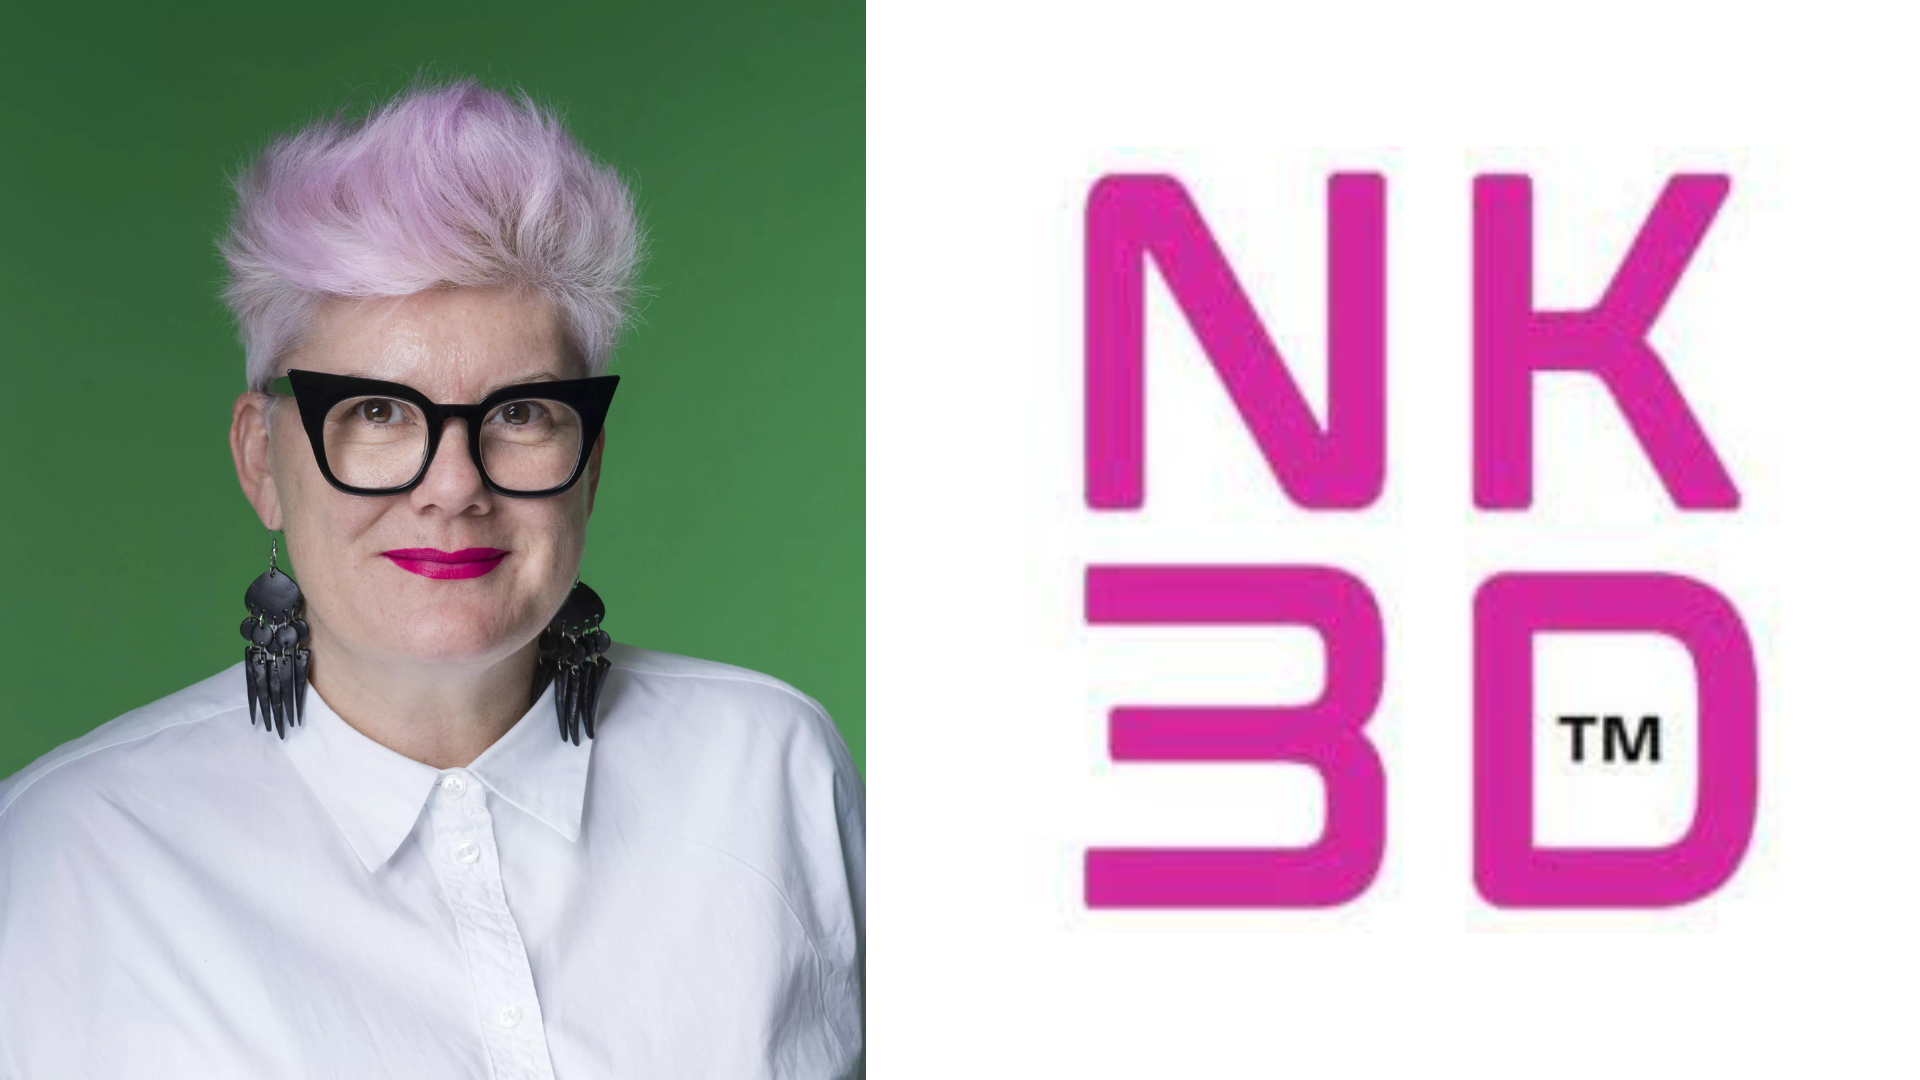 NAK3D Empowers Digital Fashion with New CEO Kelly Vero